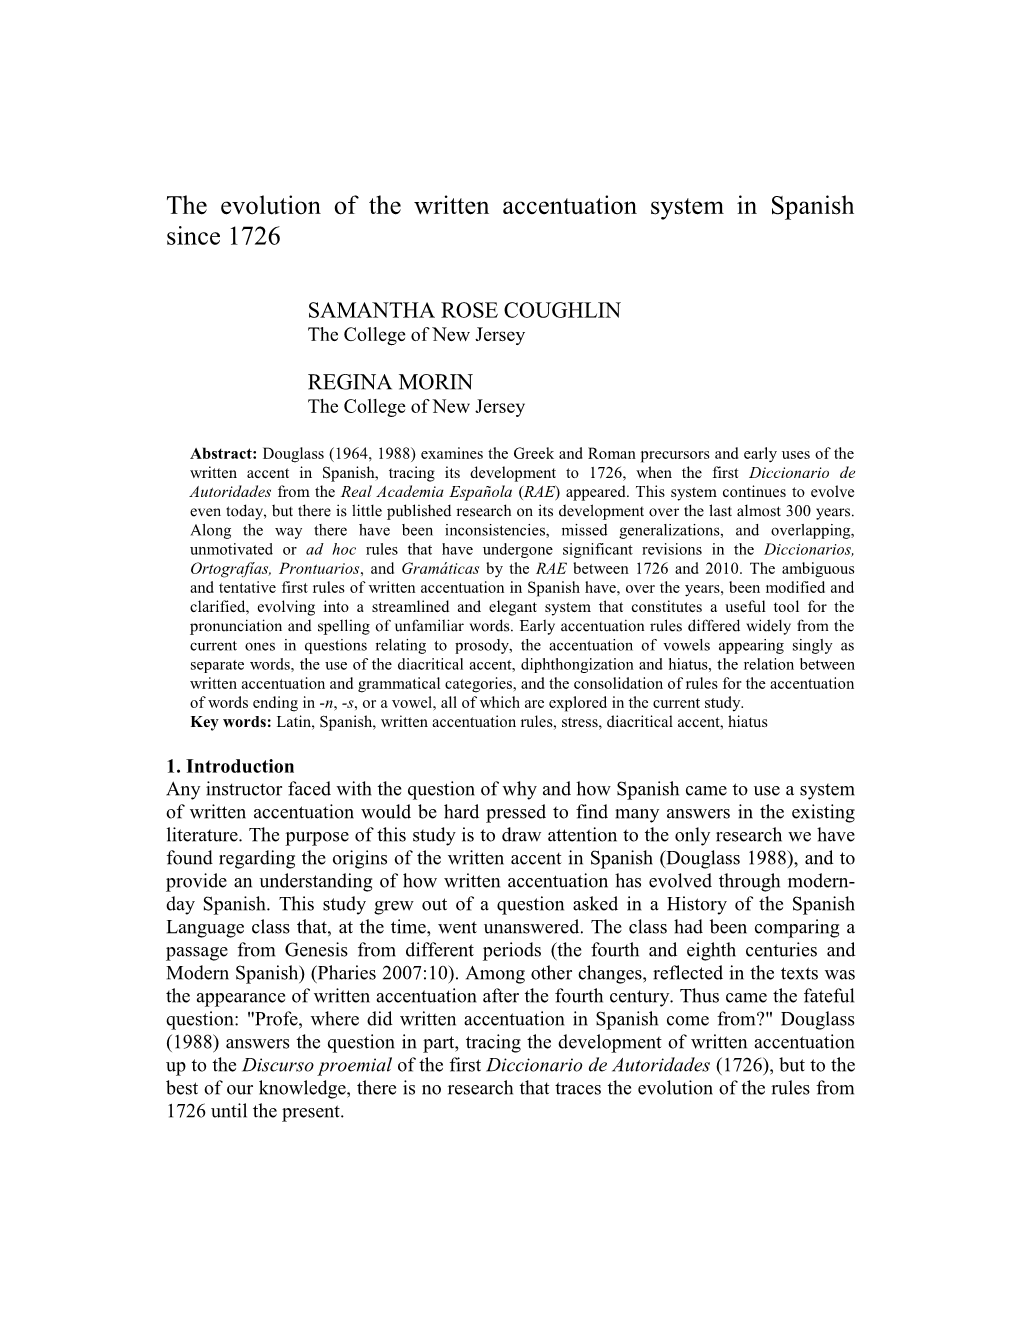 The Evolution of the Written Accentuation System in Spanish Since 1726